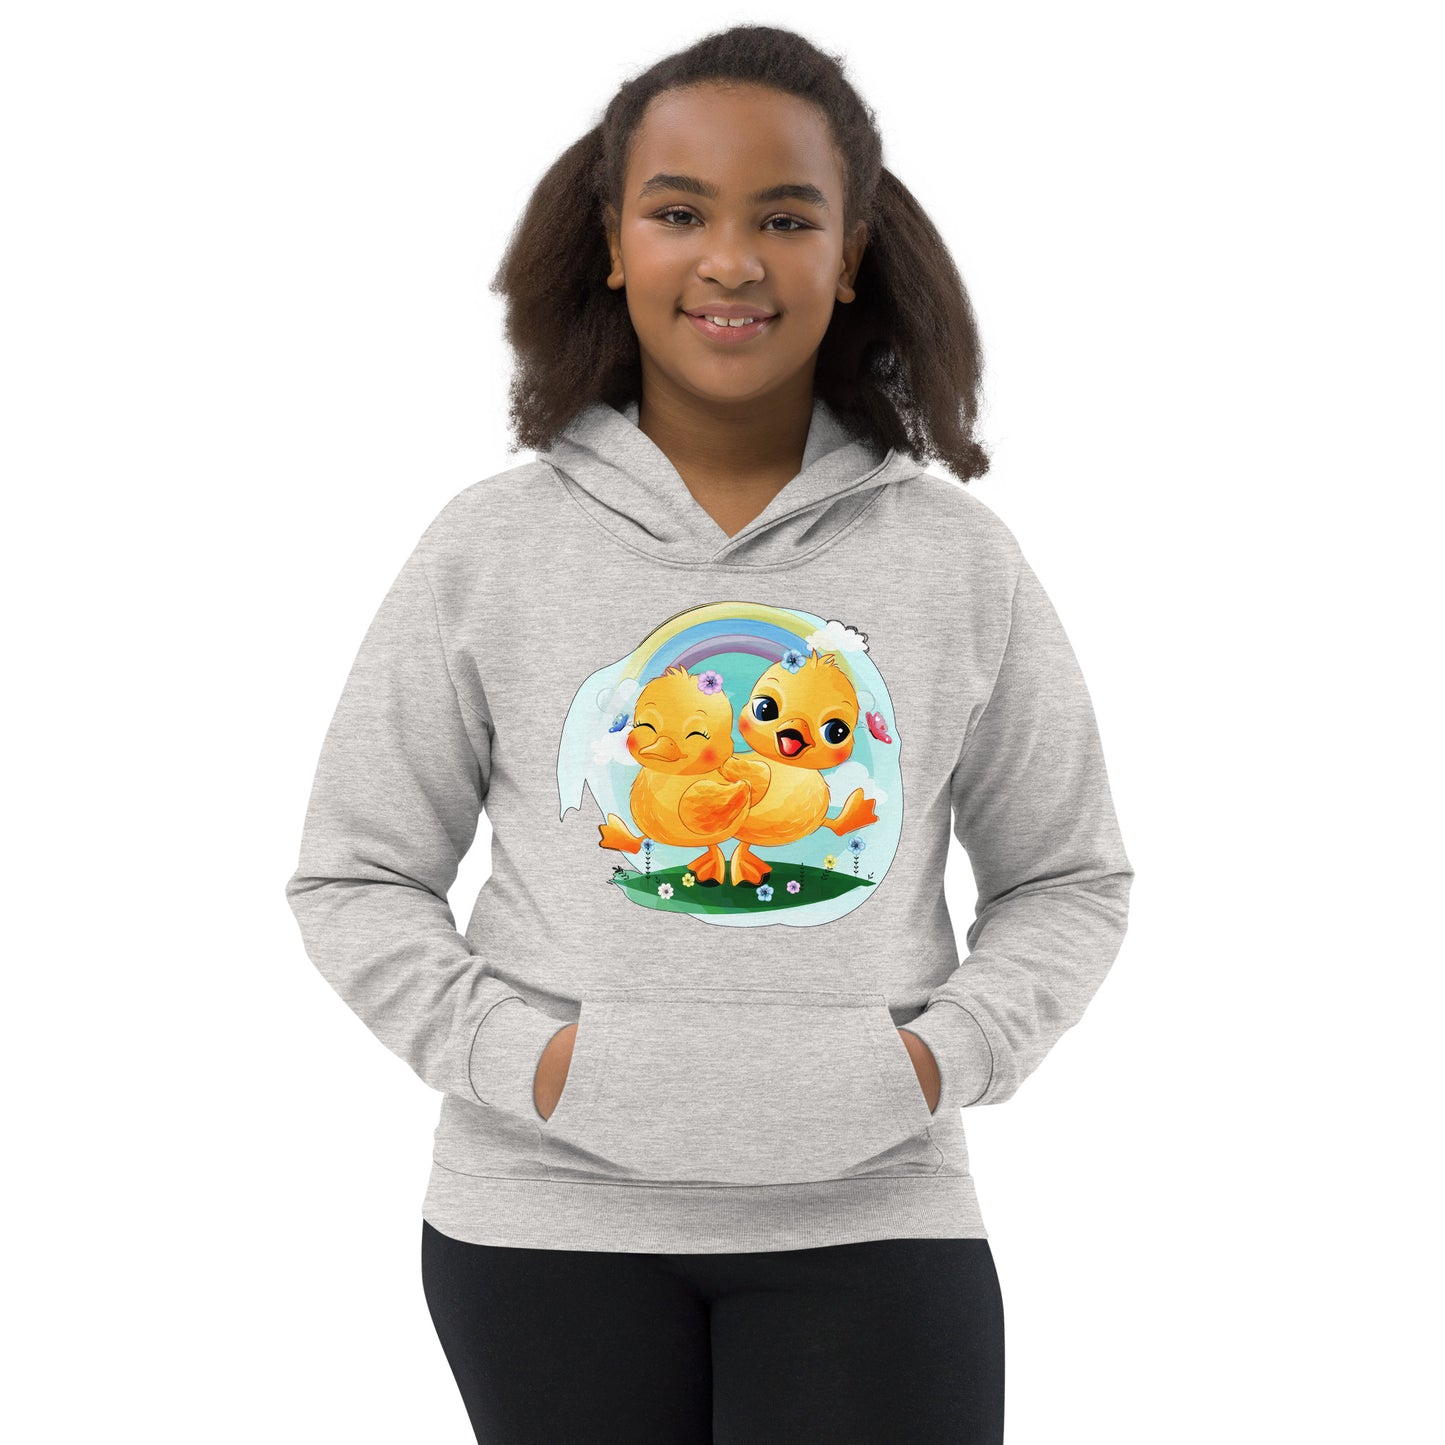 Lovely Ducky's Hoodie, No. 0075